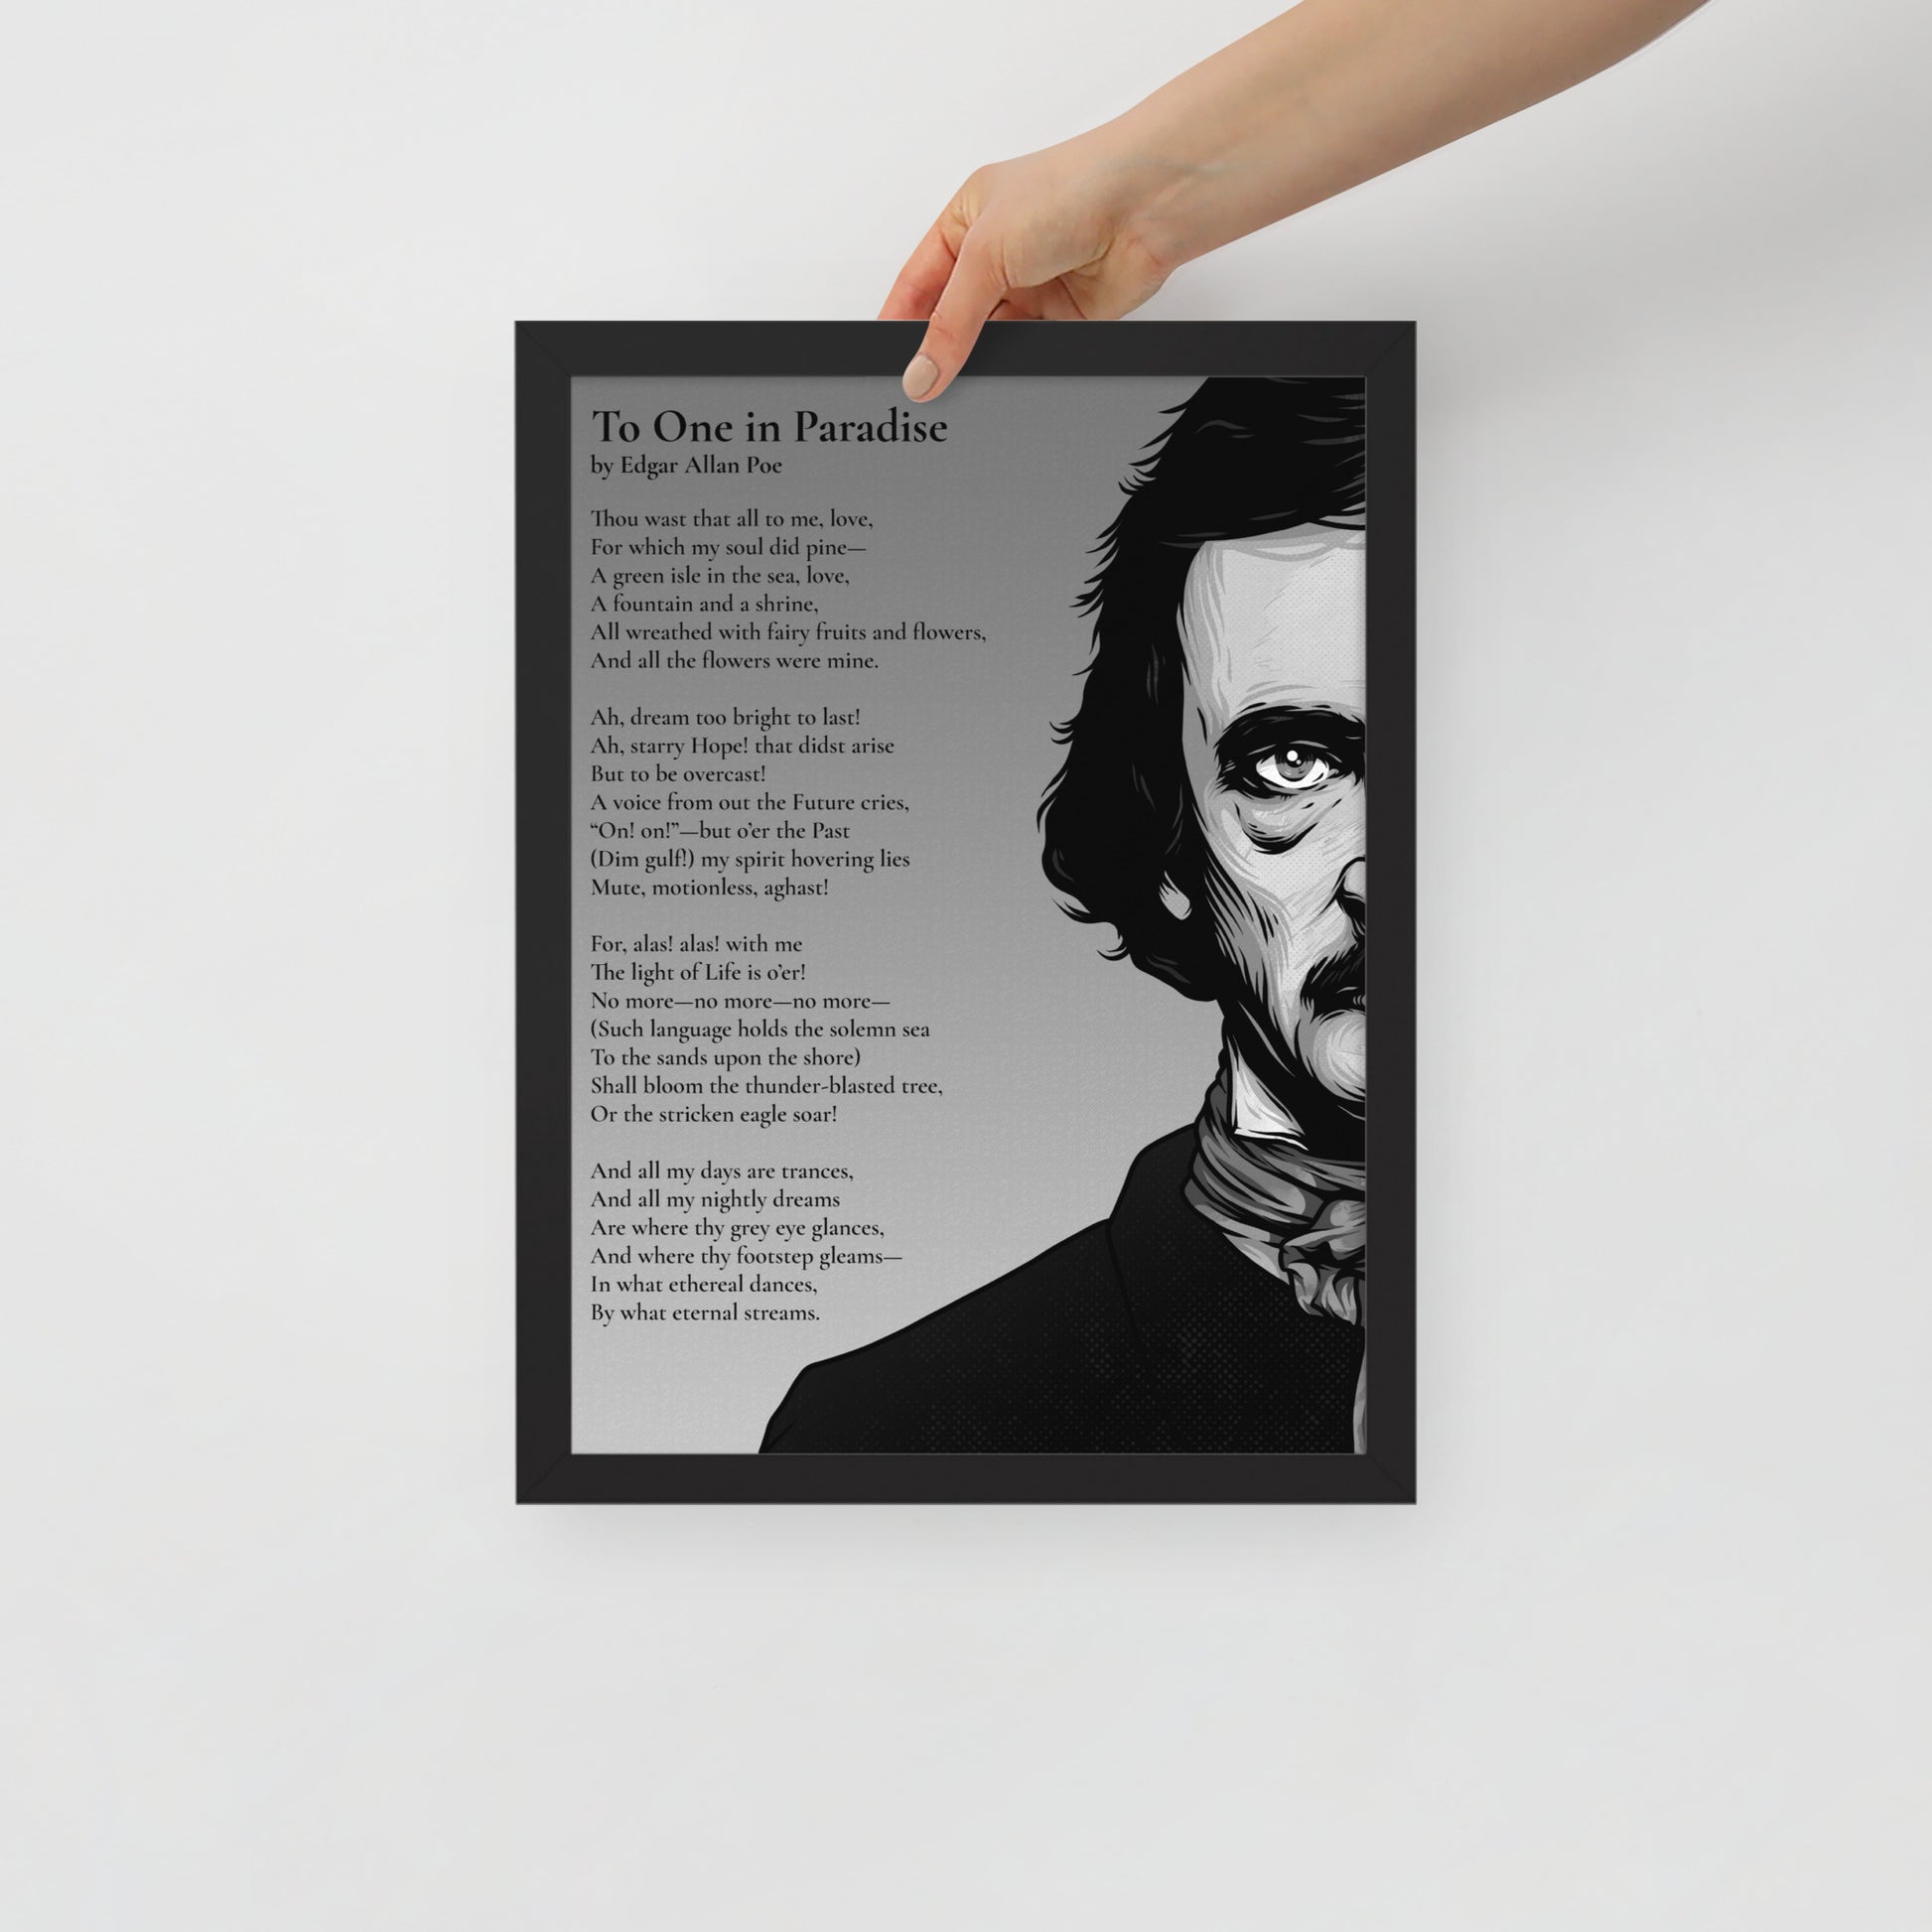 Edgar Allan Poe's 'To One in Paradise' Framed Matted Poster - 12 x 16 Black Frame